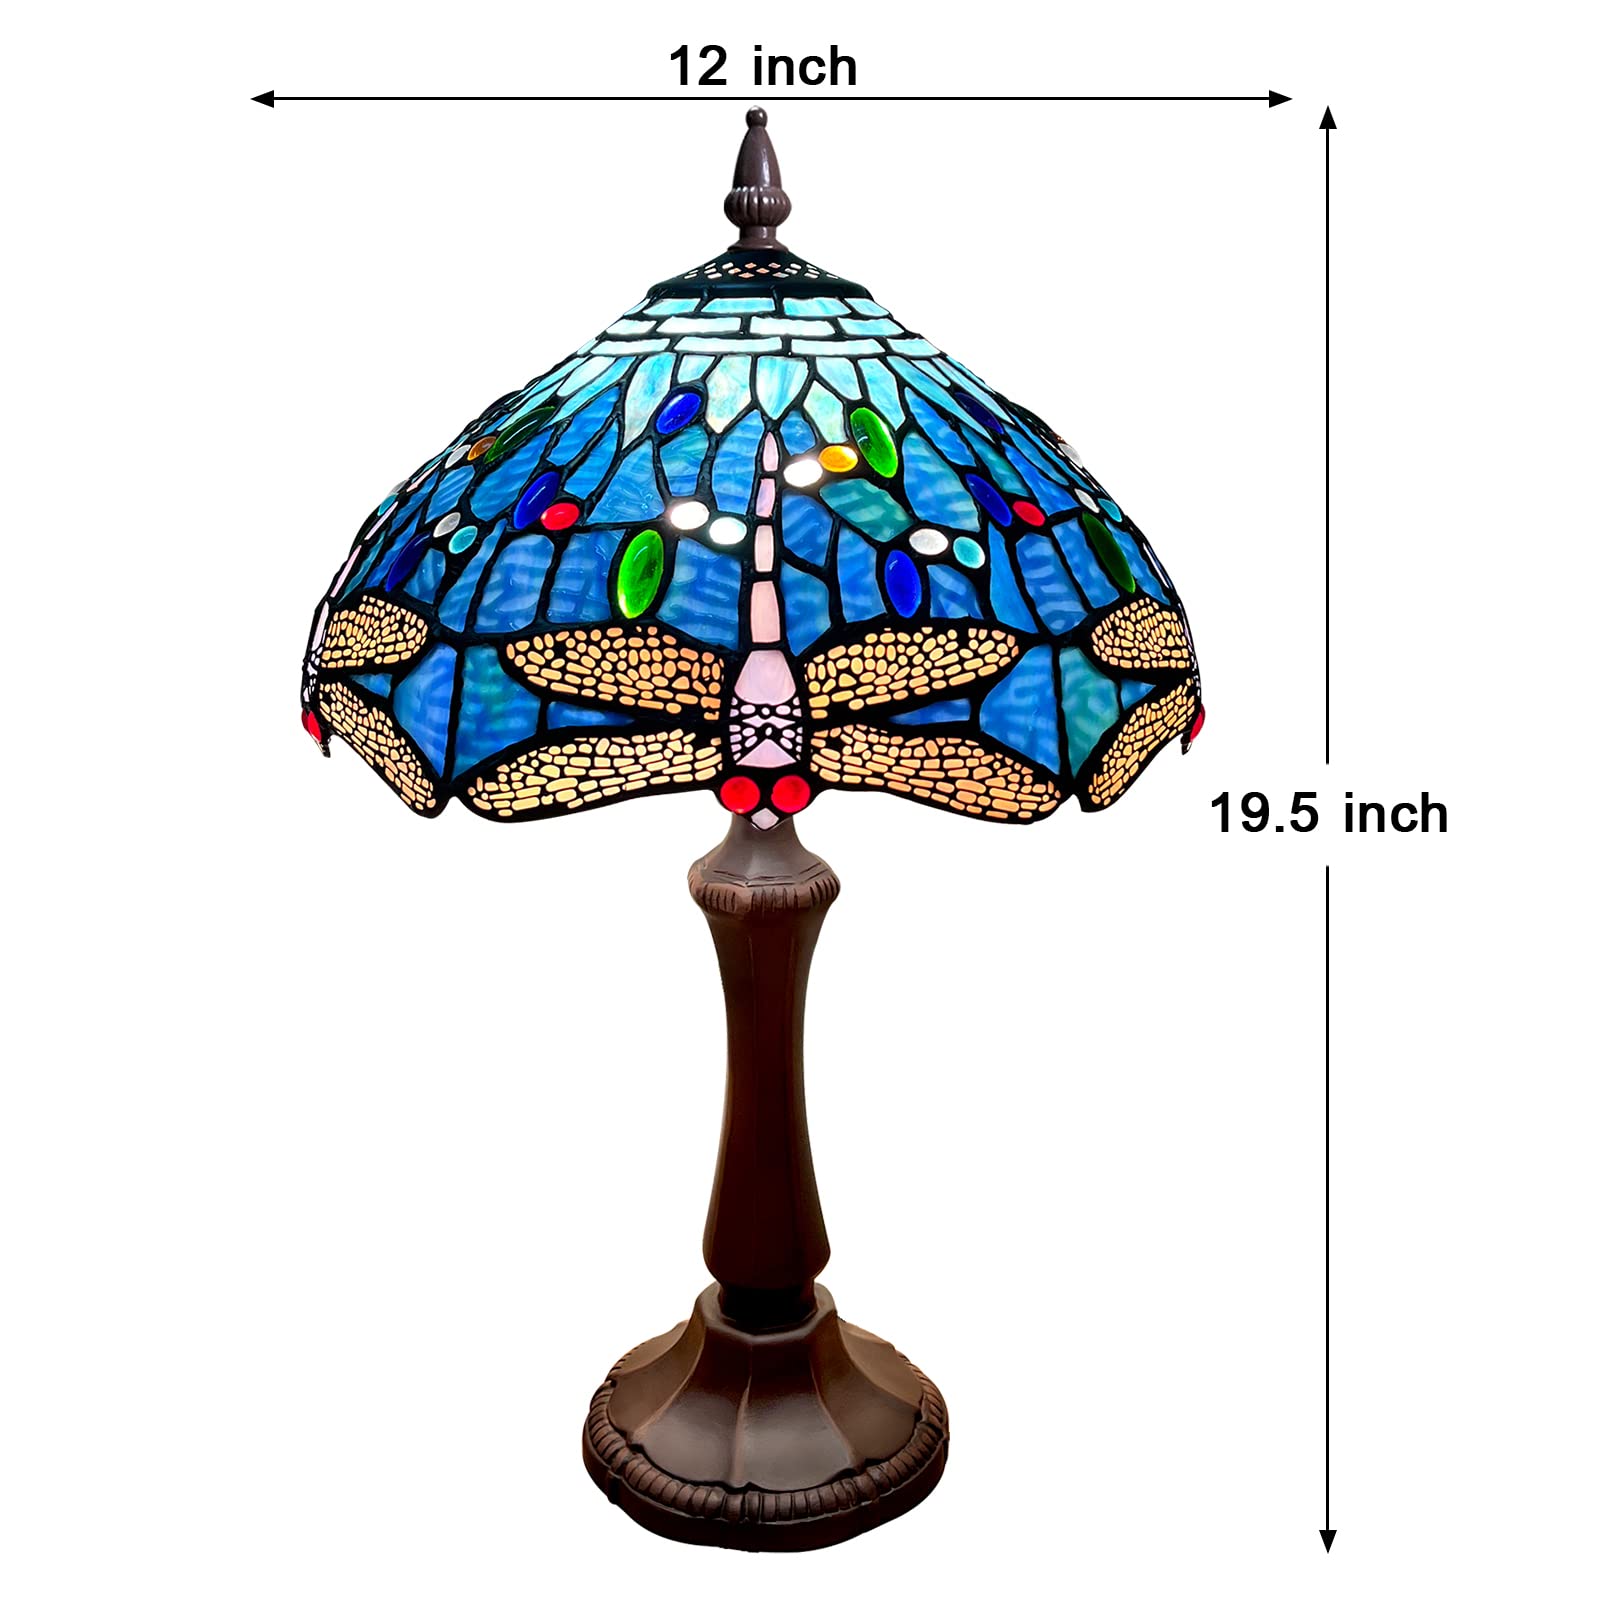 Vinplus Tiffany Lamp Table Lamp Blue Dragonfly Style Reading Desk Lamp 19" Tall - image 3 of 6